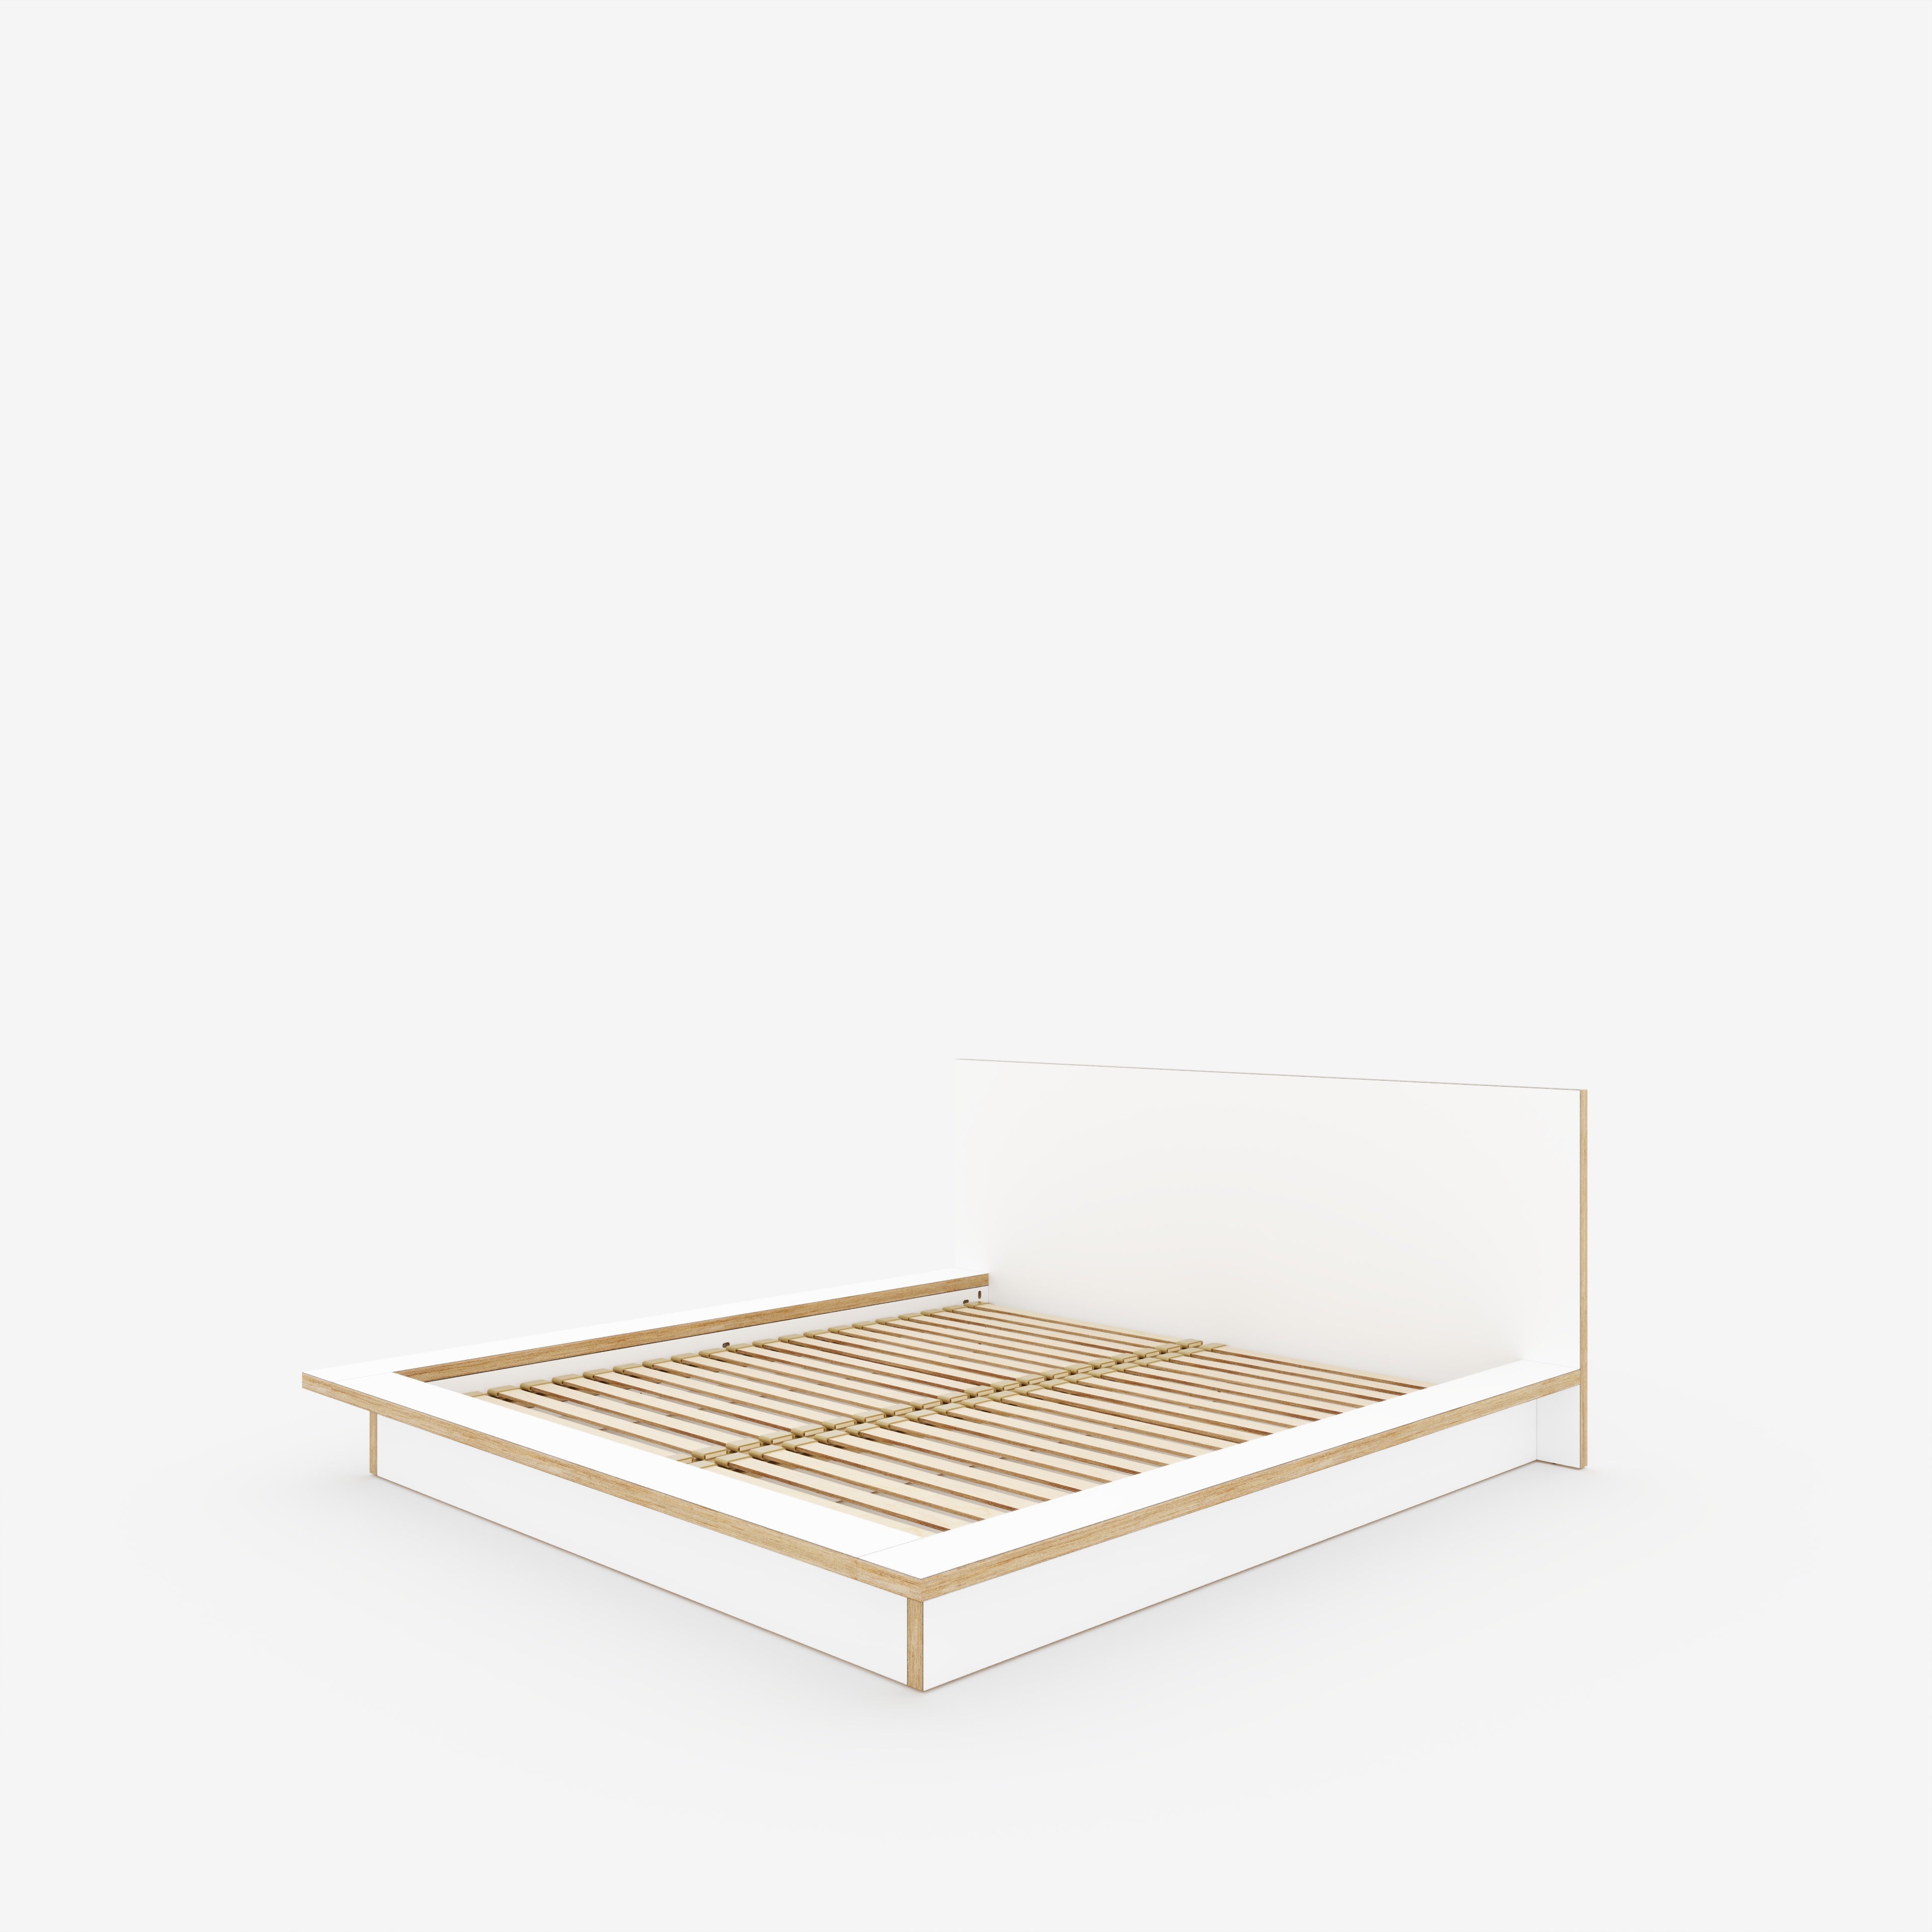 Plywood Platform Bed - Plywood Formica White - Standard Super King 1800(w) x 2000(d) Low